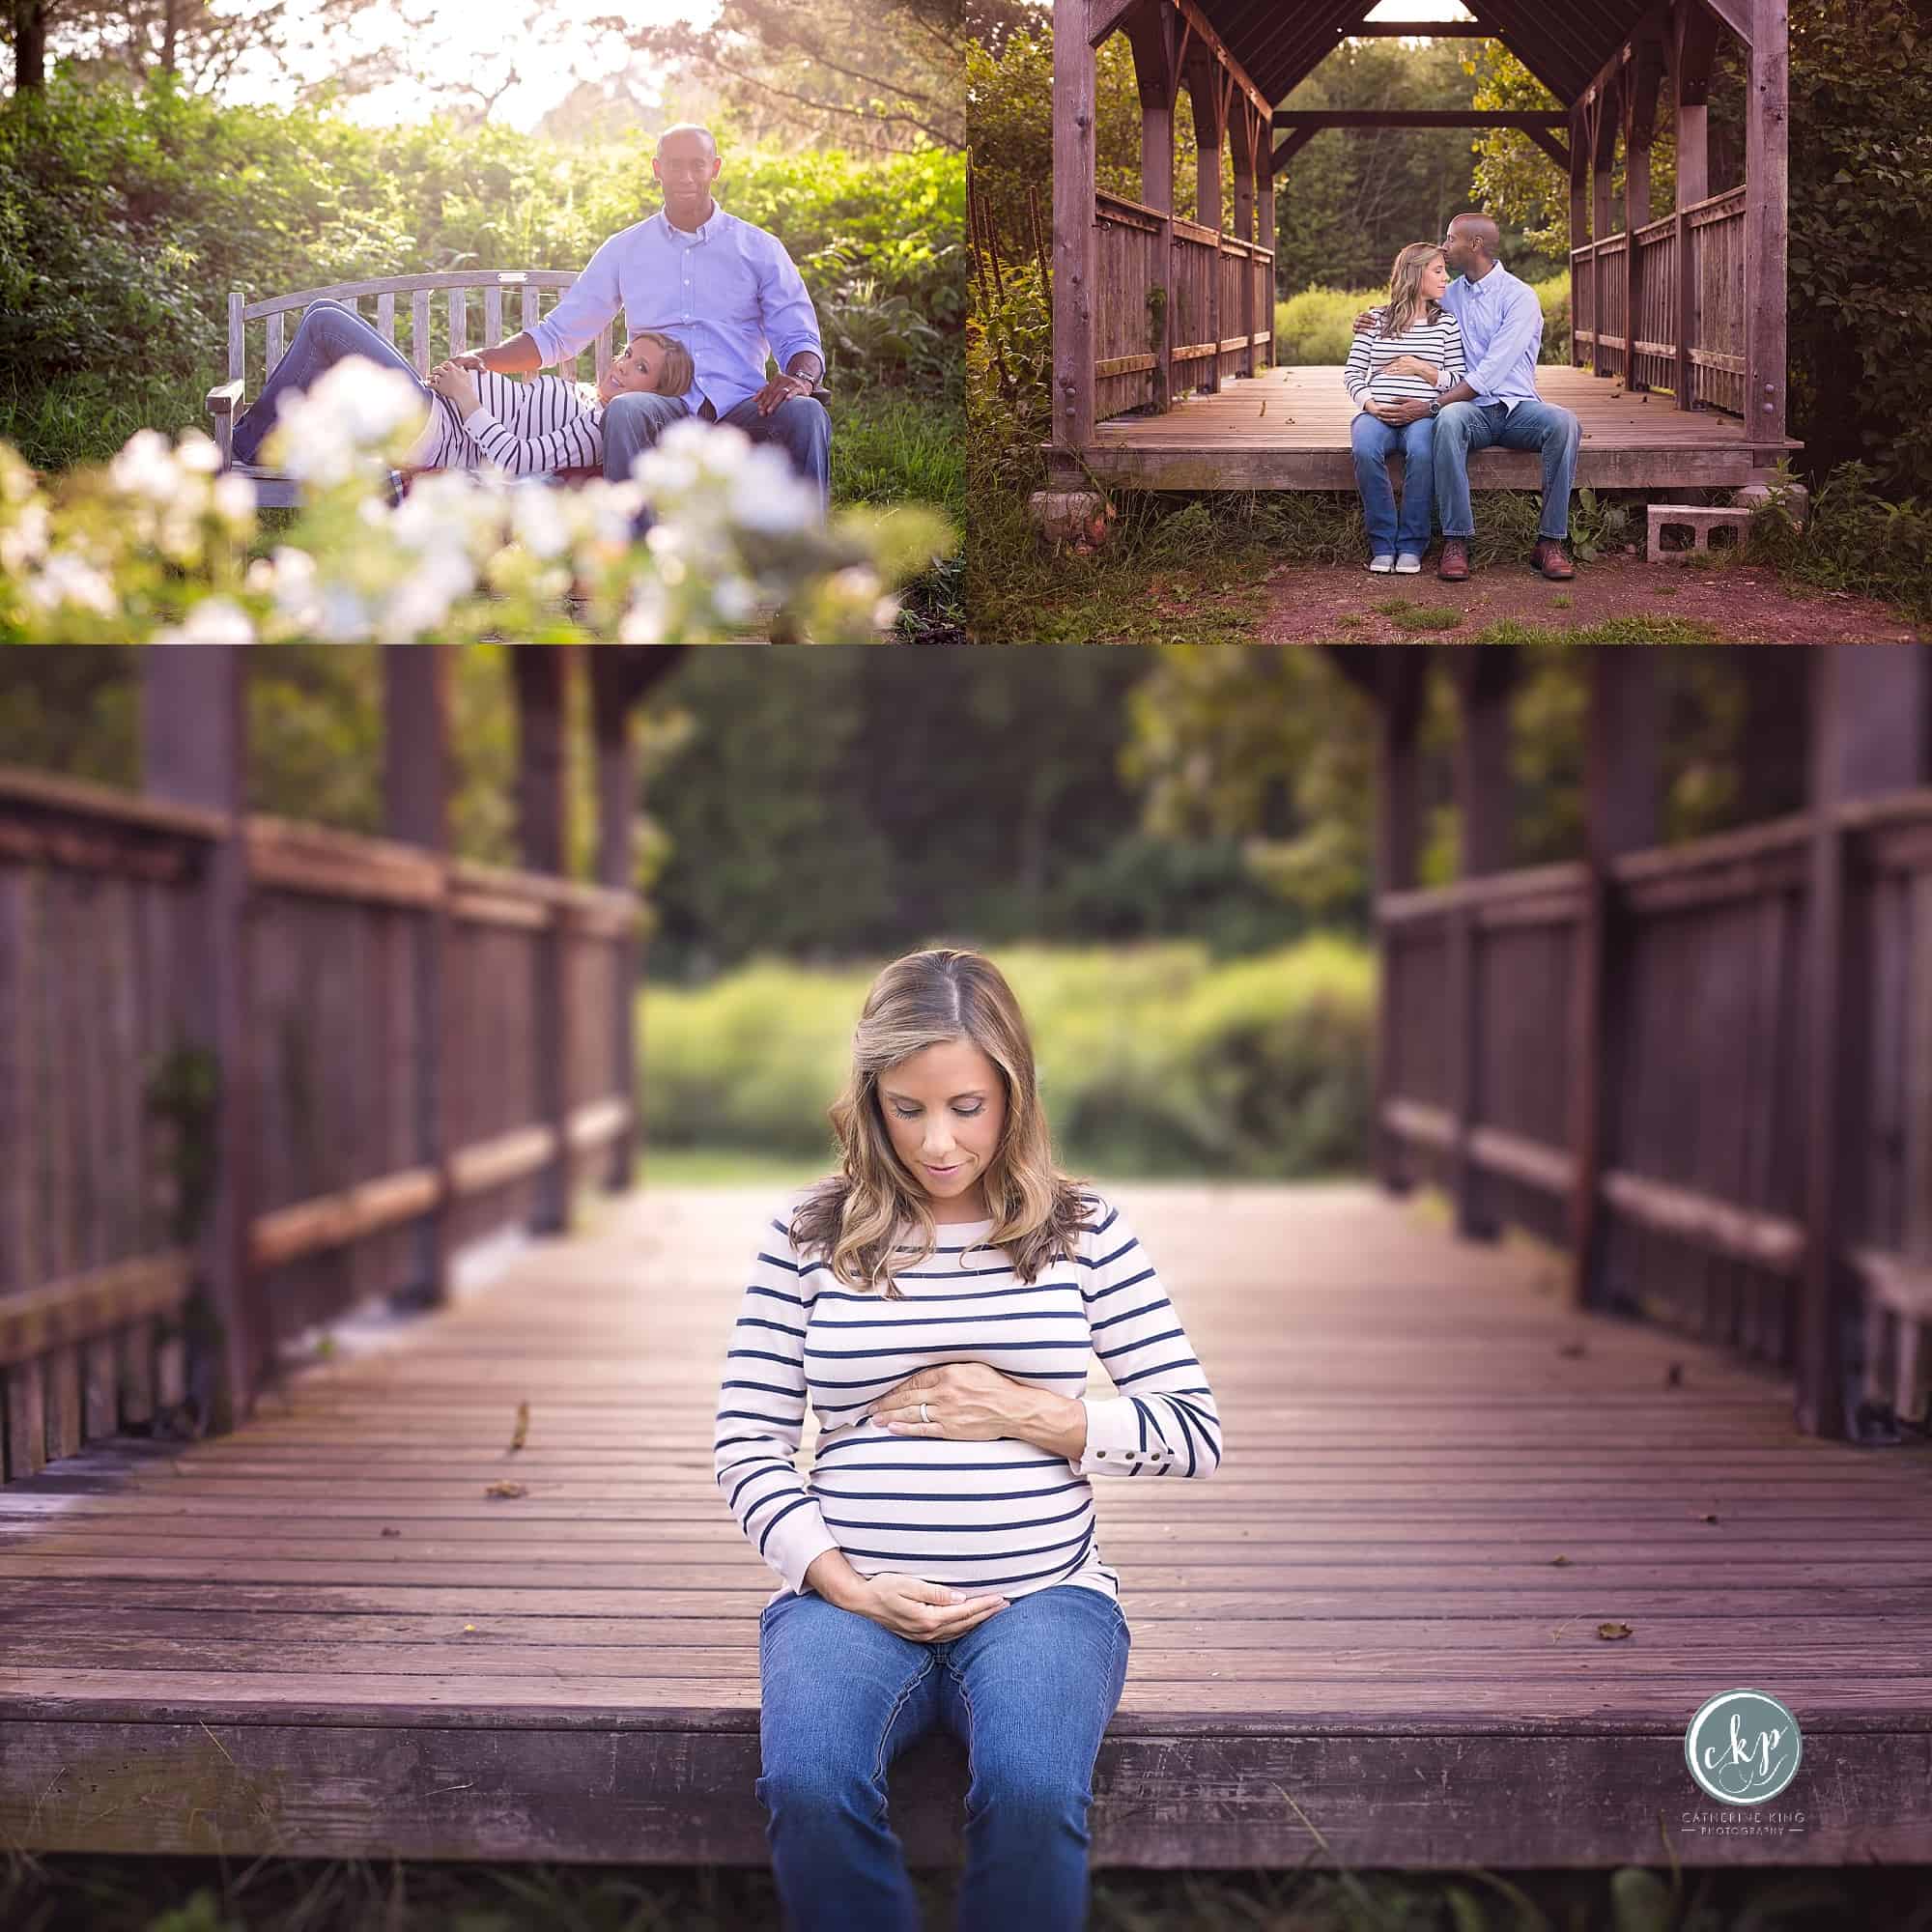 early fall ct maternity photography session at bauer park in madison ct by catherine king photography a ct maternity photographer ct shoreline